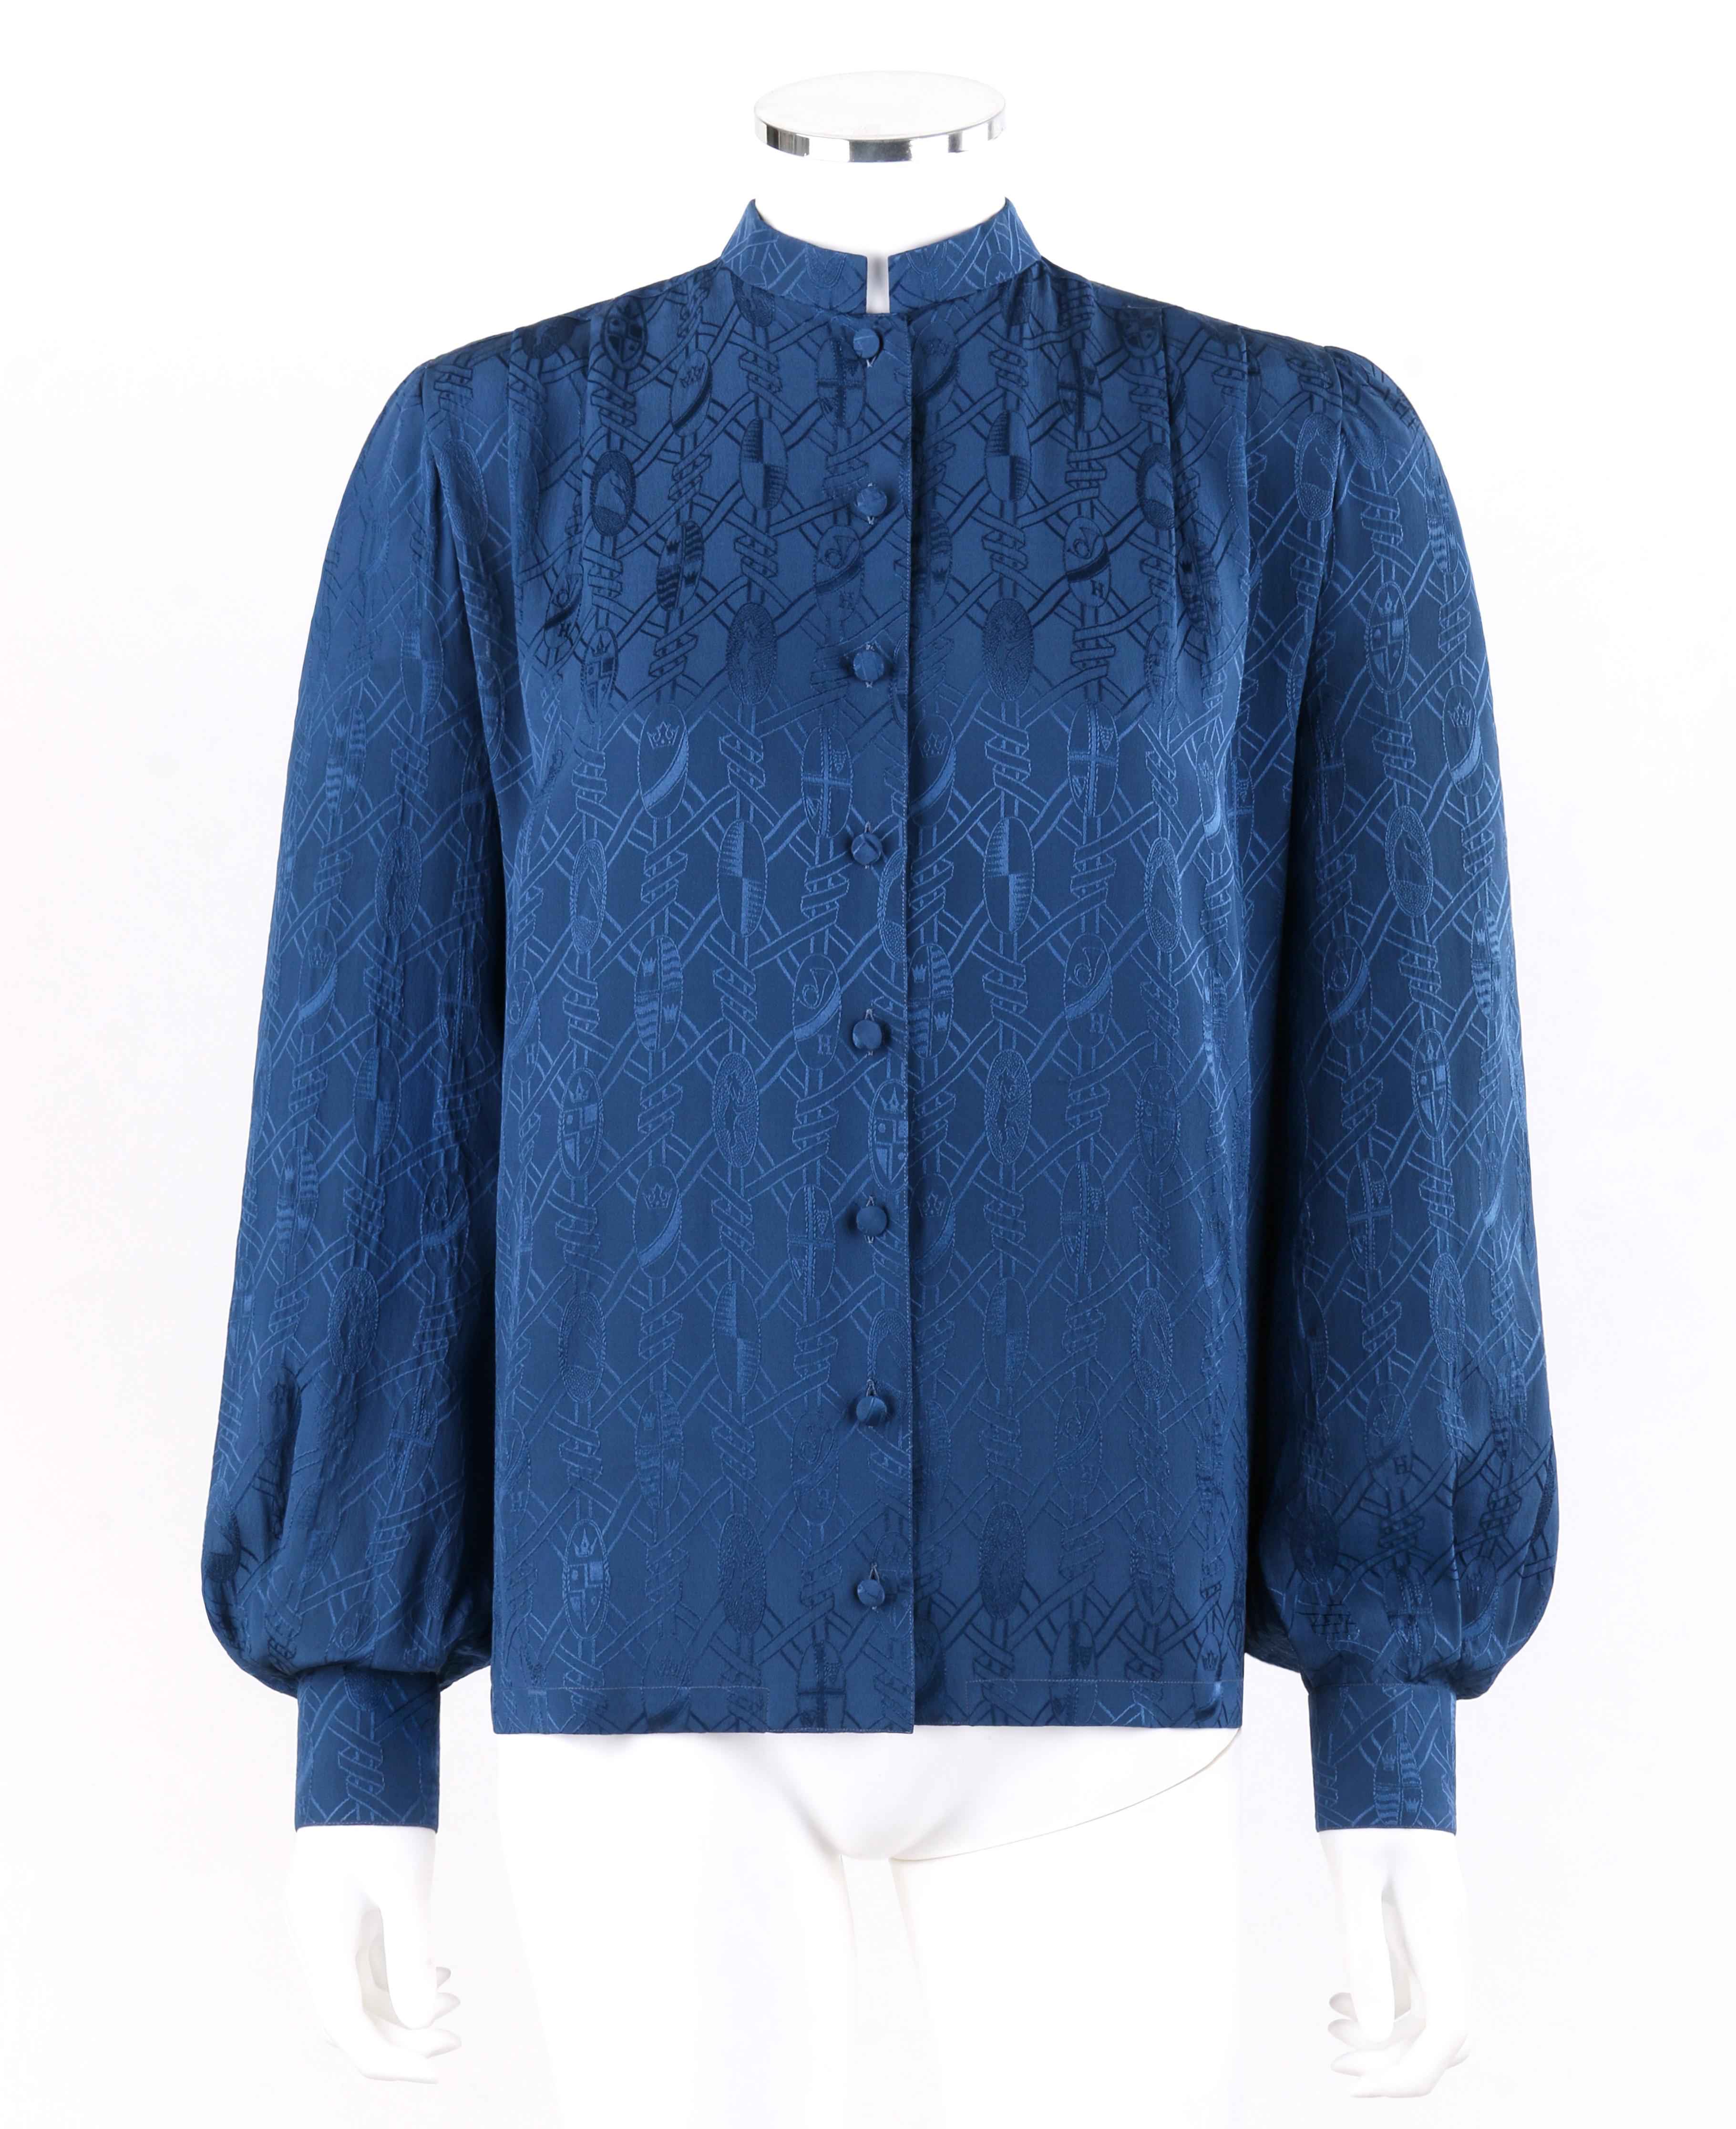 HERMES c.1970s Navy Royal Crest Silk Jacquard Bishop Sleeve Button Up Blouse 
 
Circa: 1970’s
Brand / Manufacturer: Hermes
Style: Blouse
Color(s): Shades of navy blue (exterior, interior)
Lined: No
Marked Fabric Content: “100% silk”
Additional